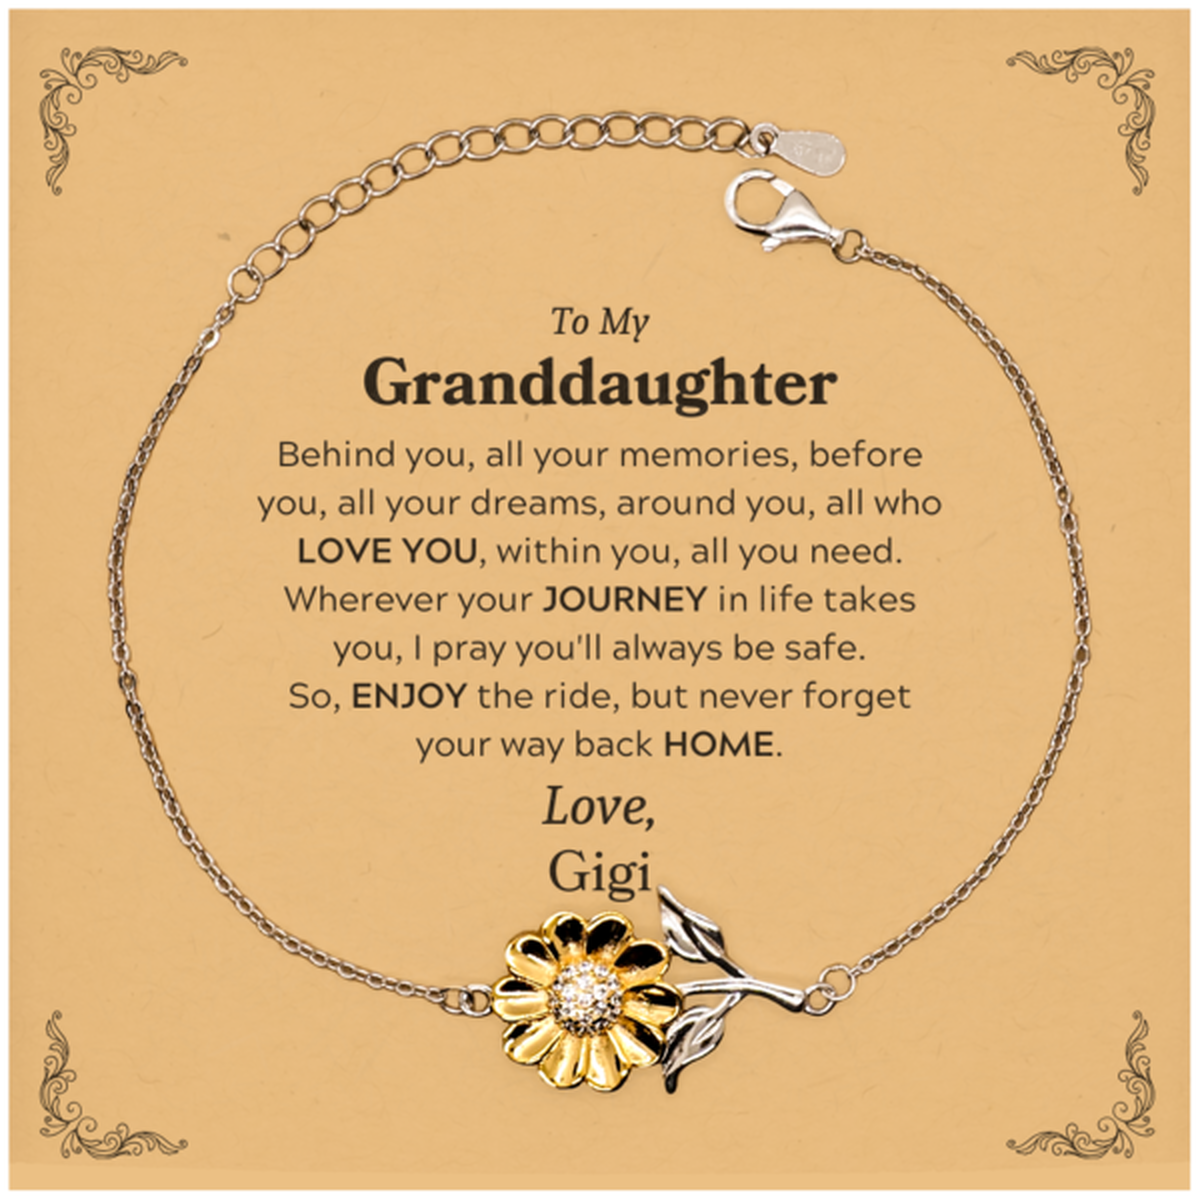 To My Granddaughter Graduation Gifts from Gigi, Granddaughter Sunflower Bracelet Christmas Birthday Gifts for Granddaughter Behind you, all your memories, before you, all your dreams. Love, Gigi